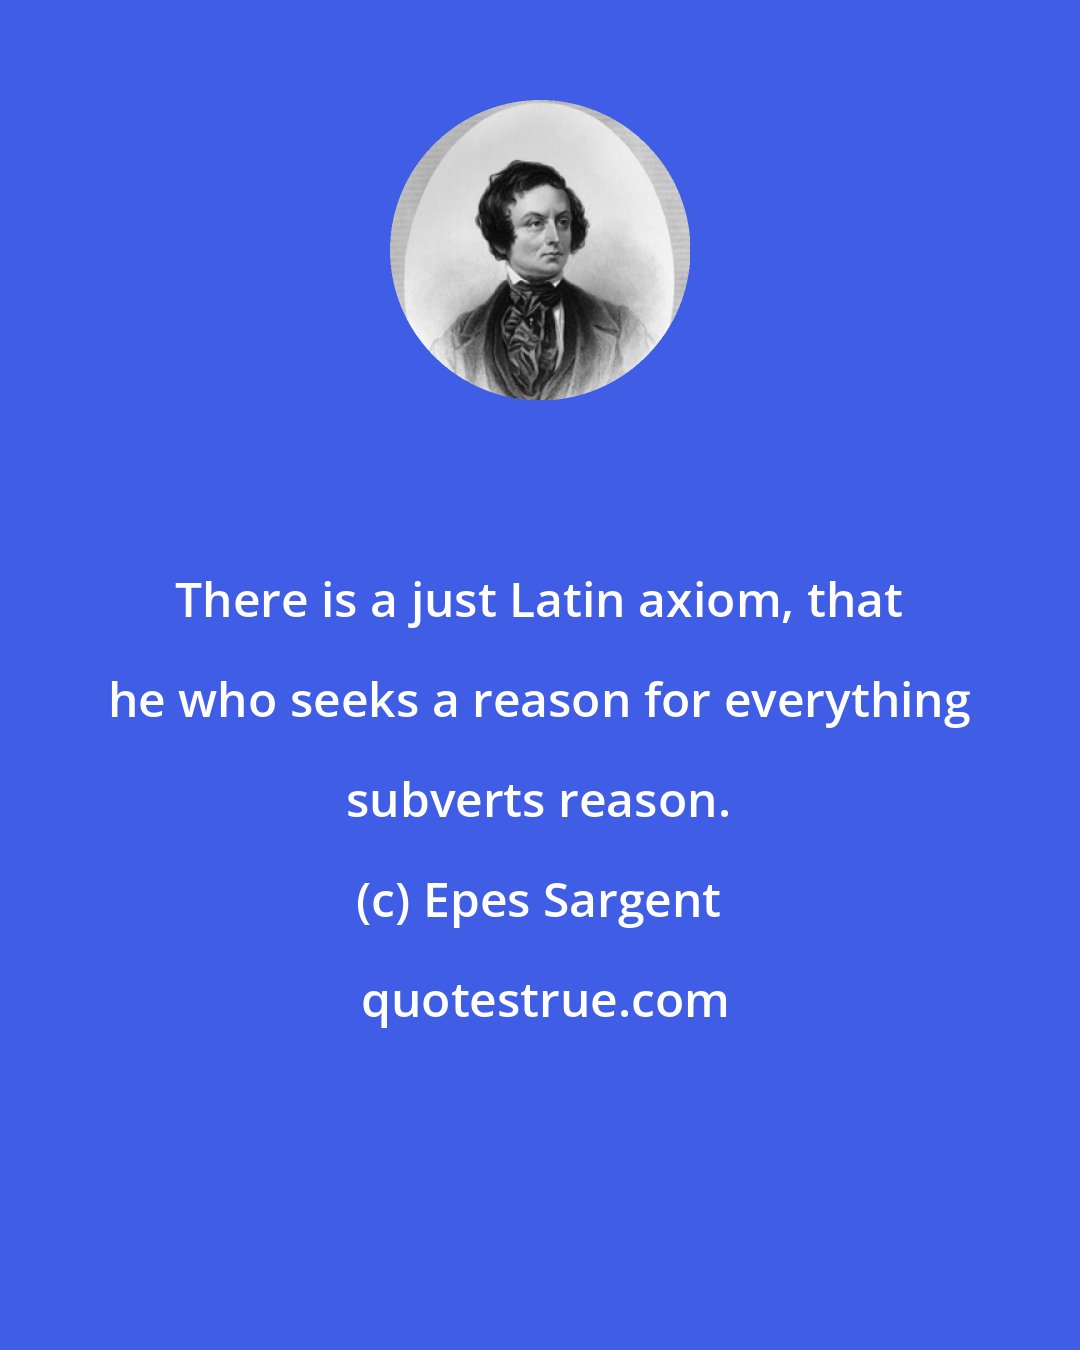 Epes Sargent: There is a just Latin axiom, that he who seeks a reason for everything subverts reason.